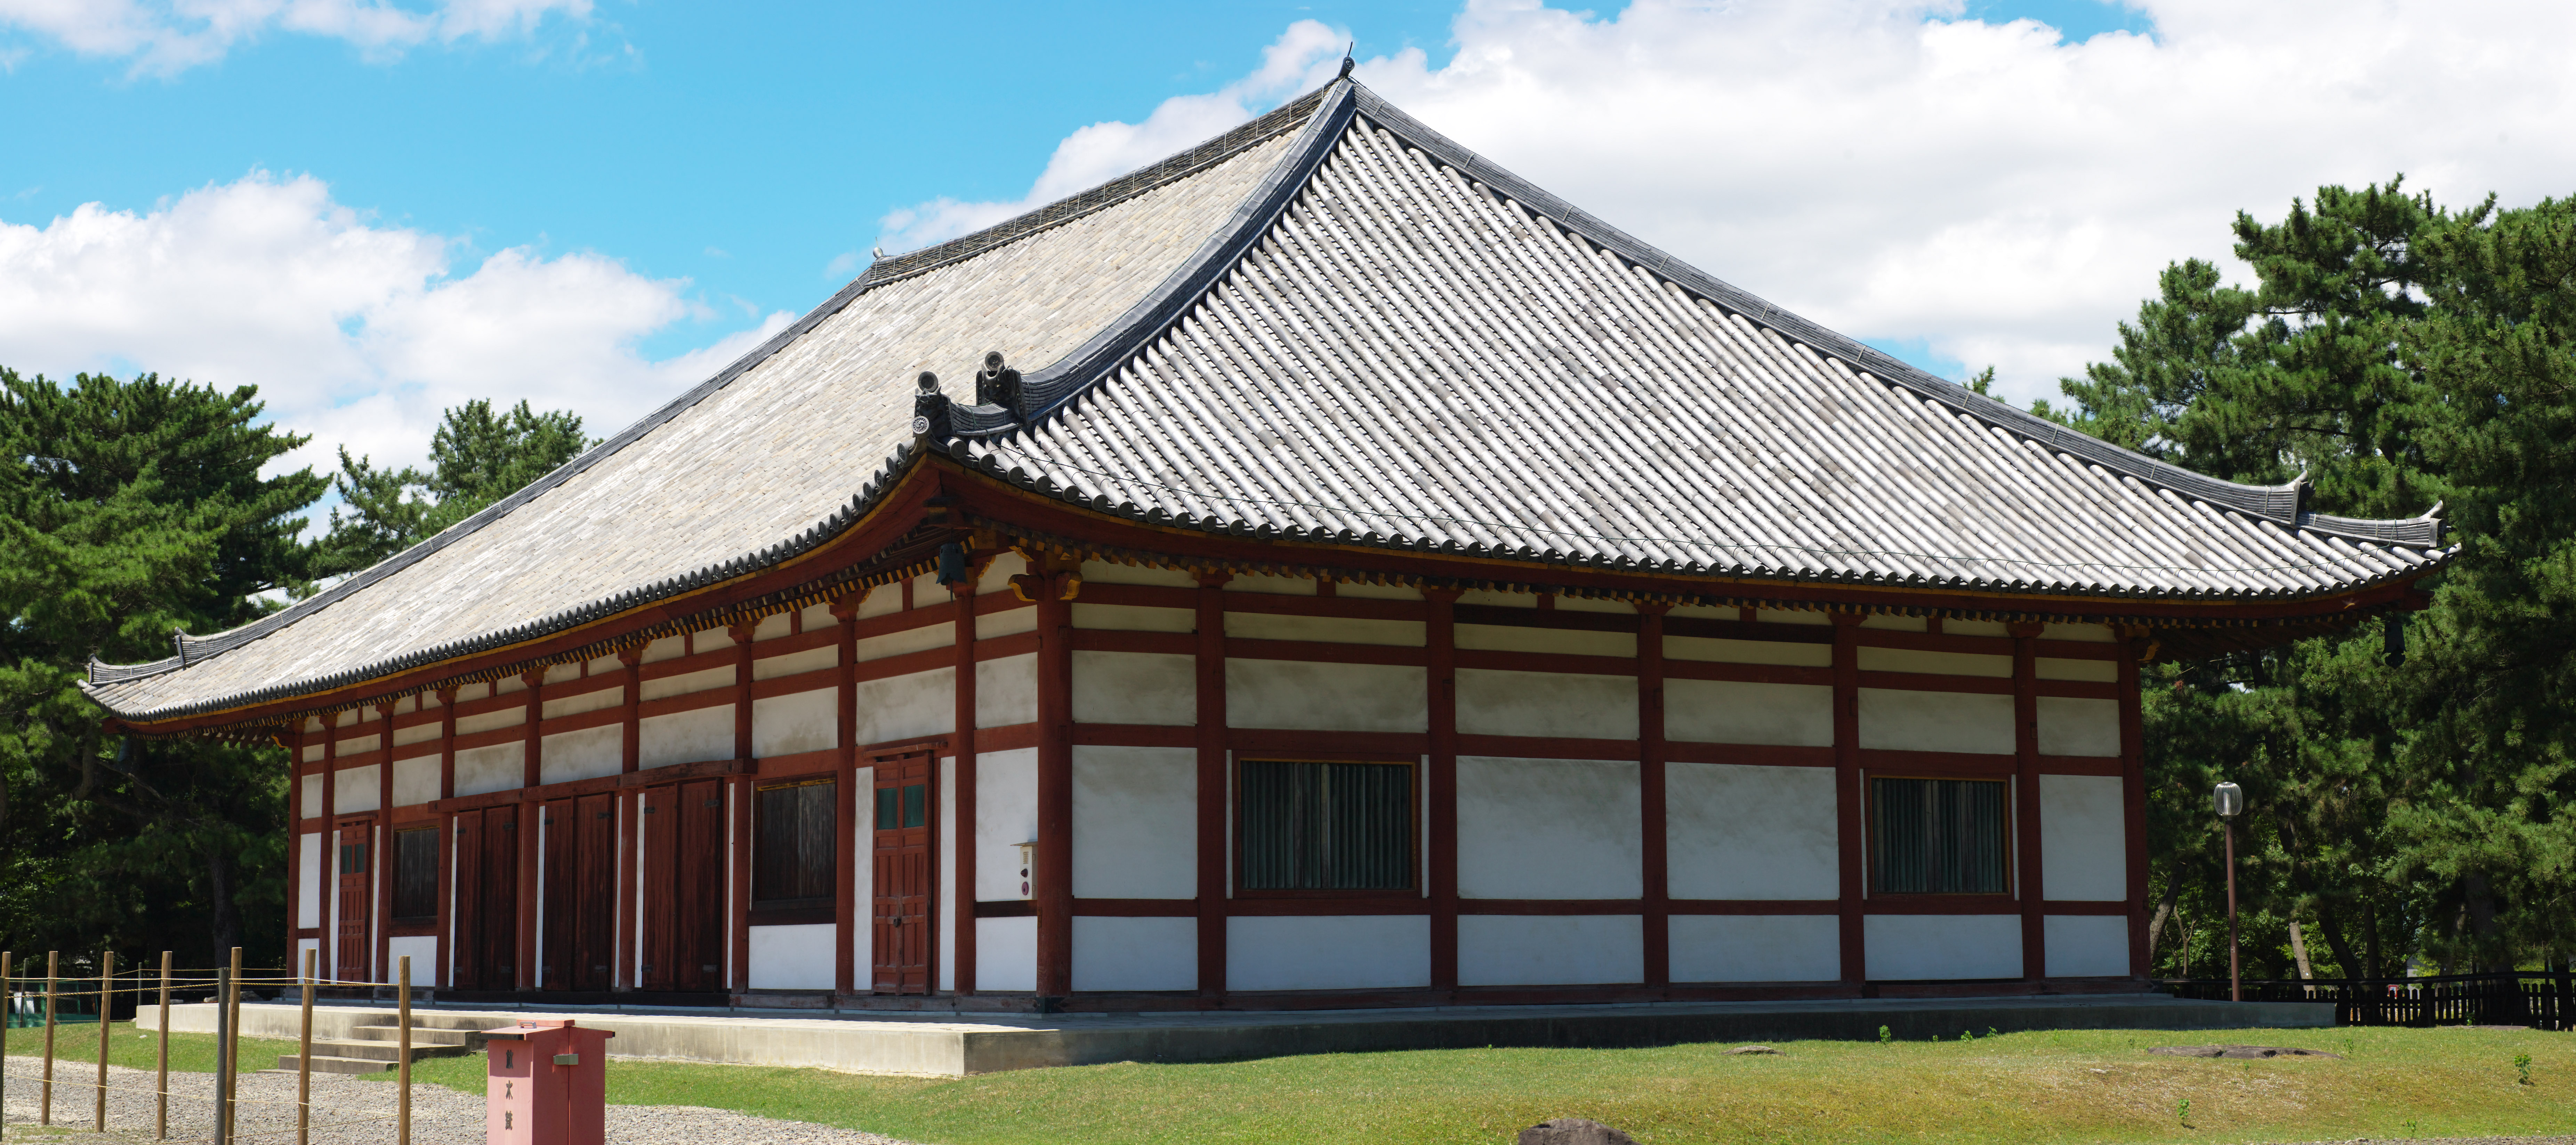 photo,material,free,landscape,picture,stock photo,Creative Commons,Kofuku-ji Temple temporary inner temple, Buddhism, wooden building, roof, world heritage